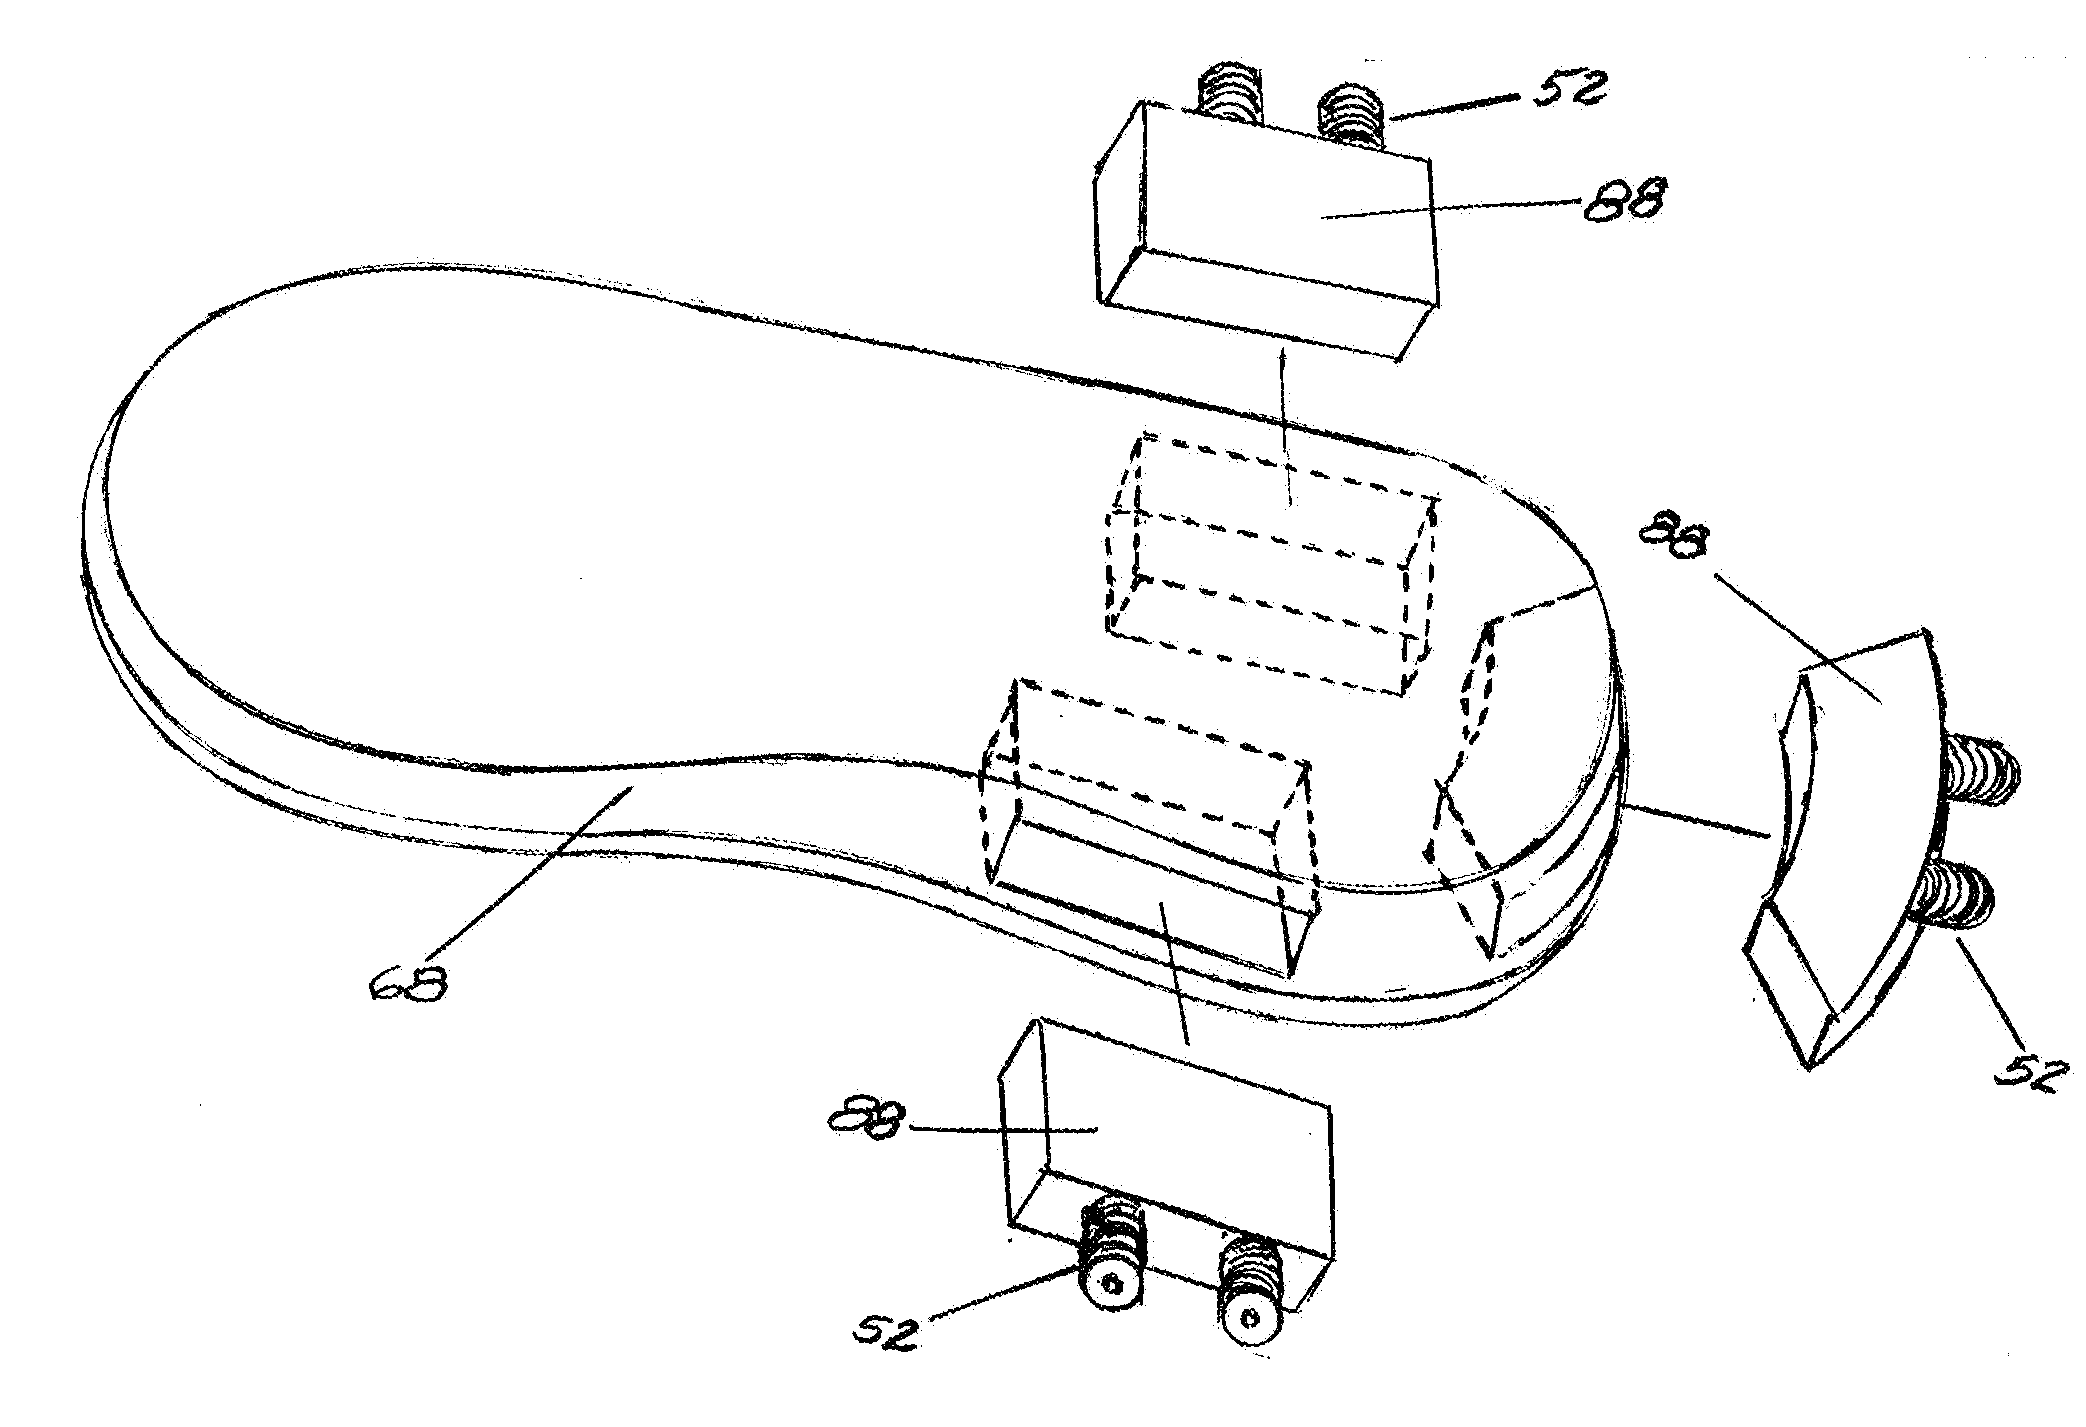 Multi-directional support system with flex support bars for use on footwear